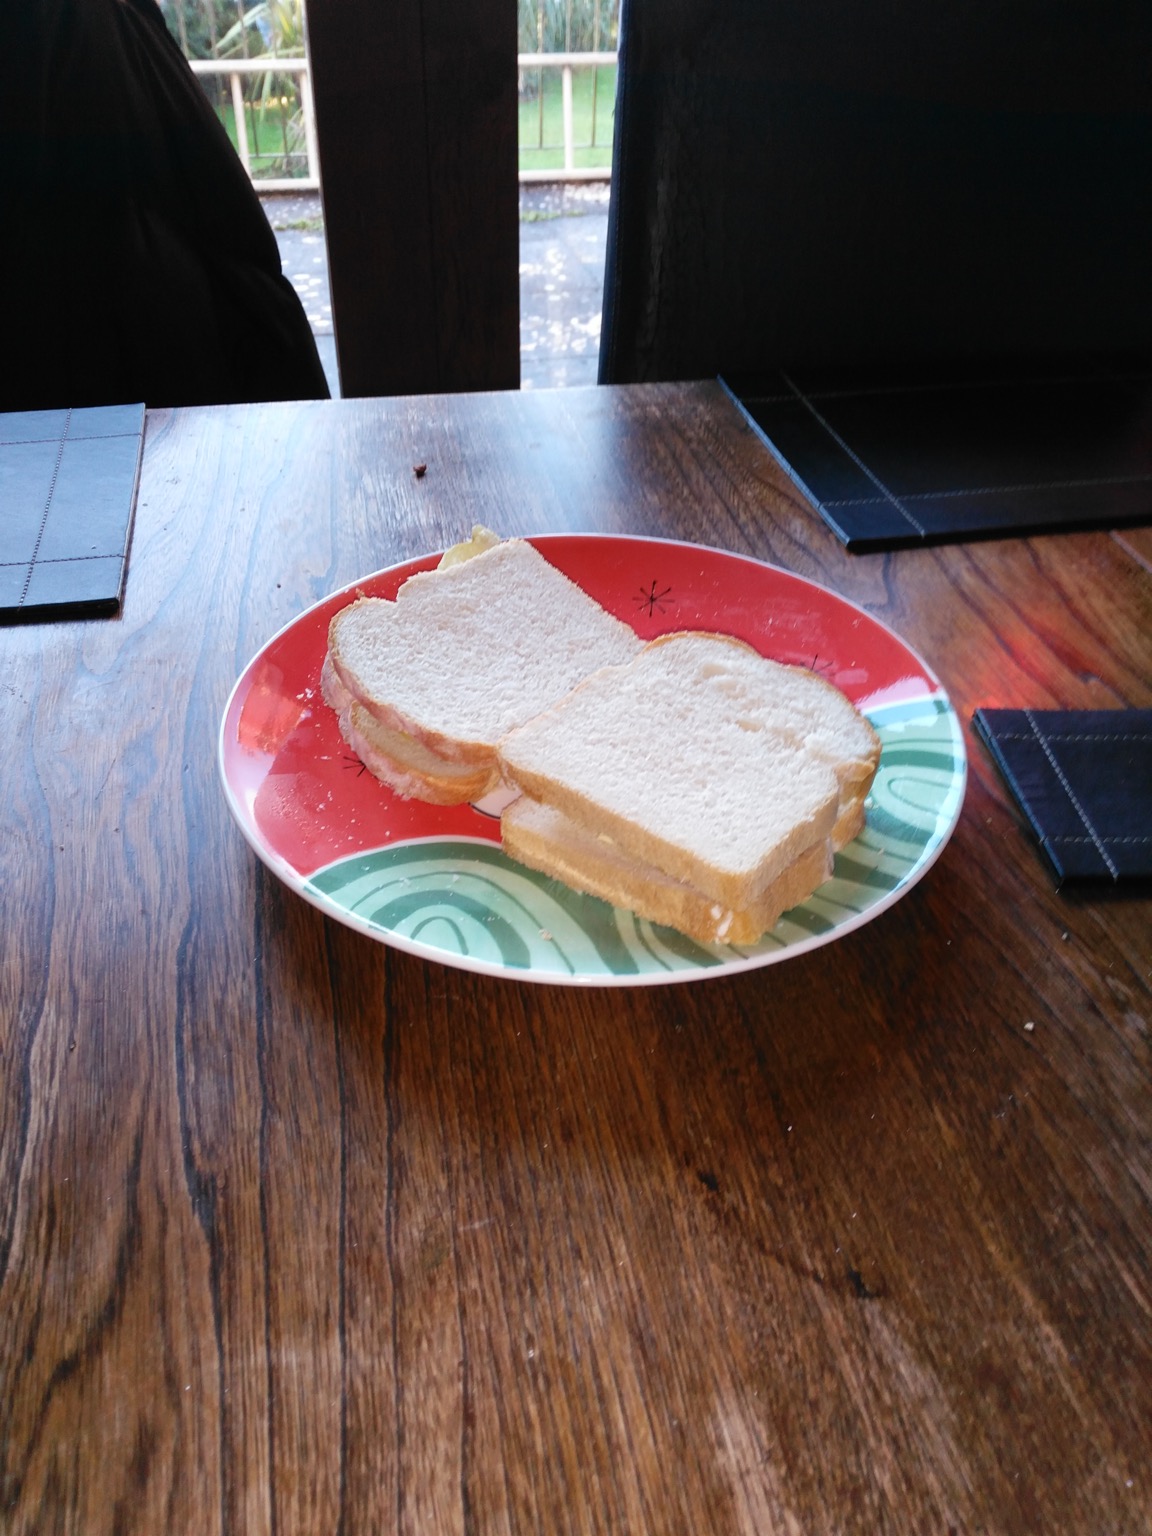 Two crisp sandwiches with white sliced bread